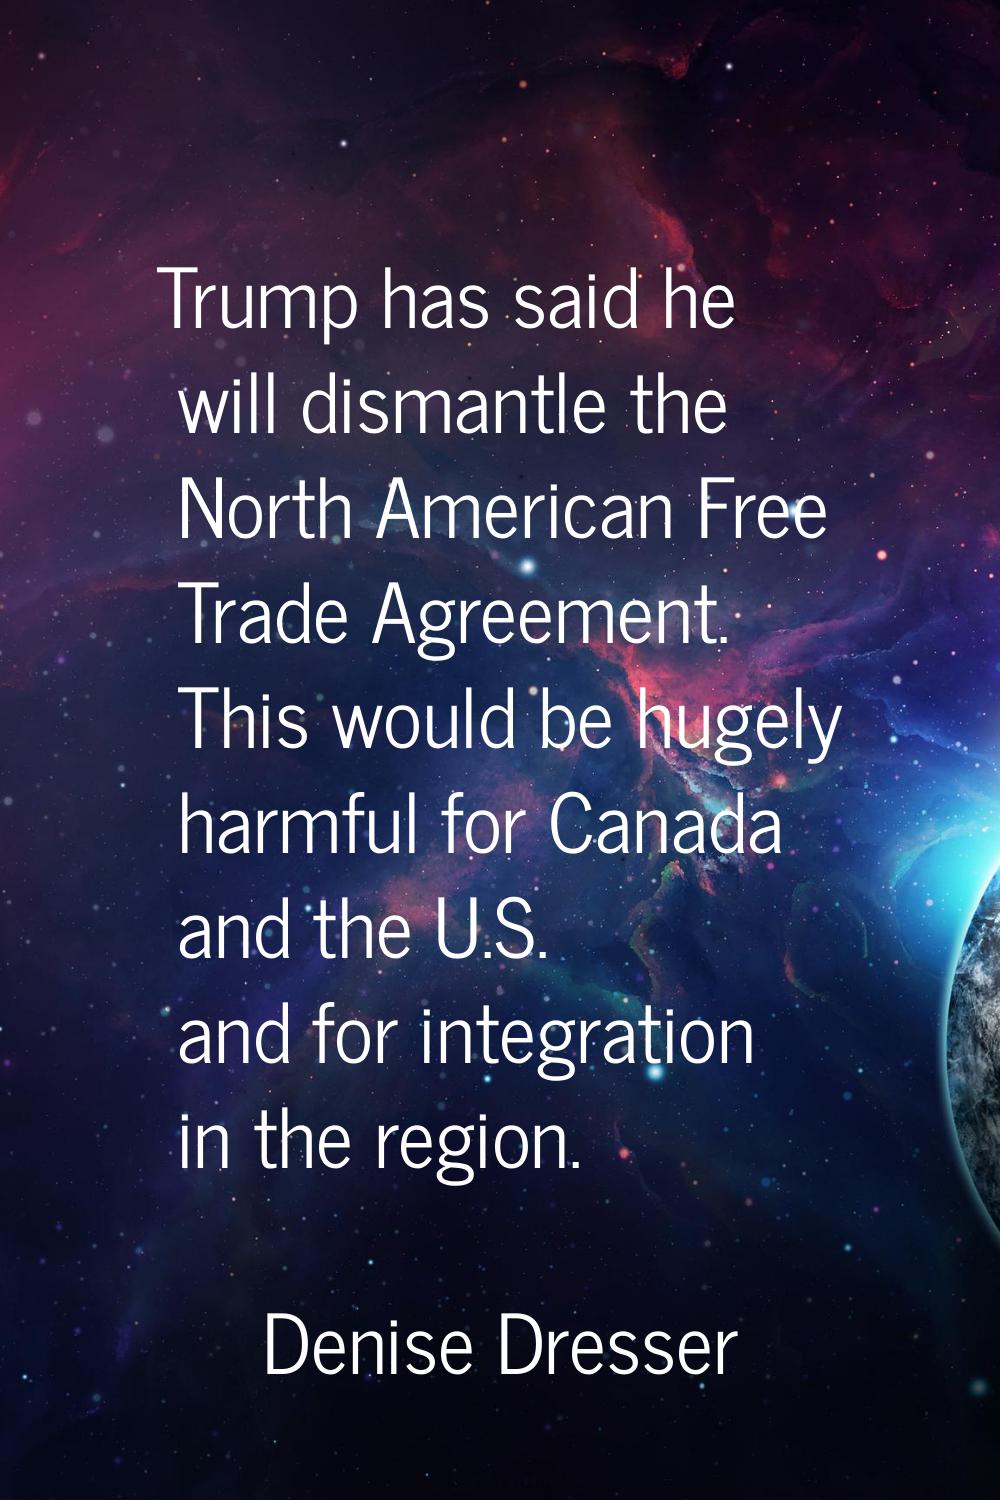 Trump has said he will dismantle the North American Free Trade Agreement. This would be hugely harm